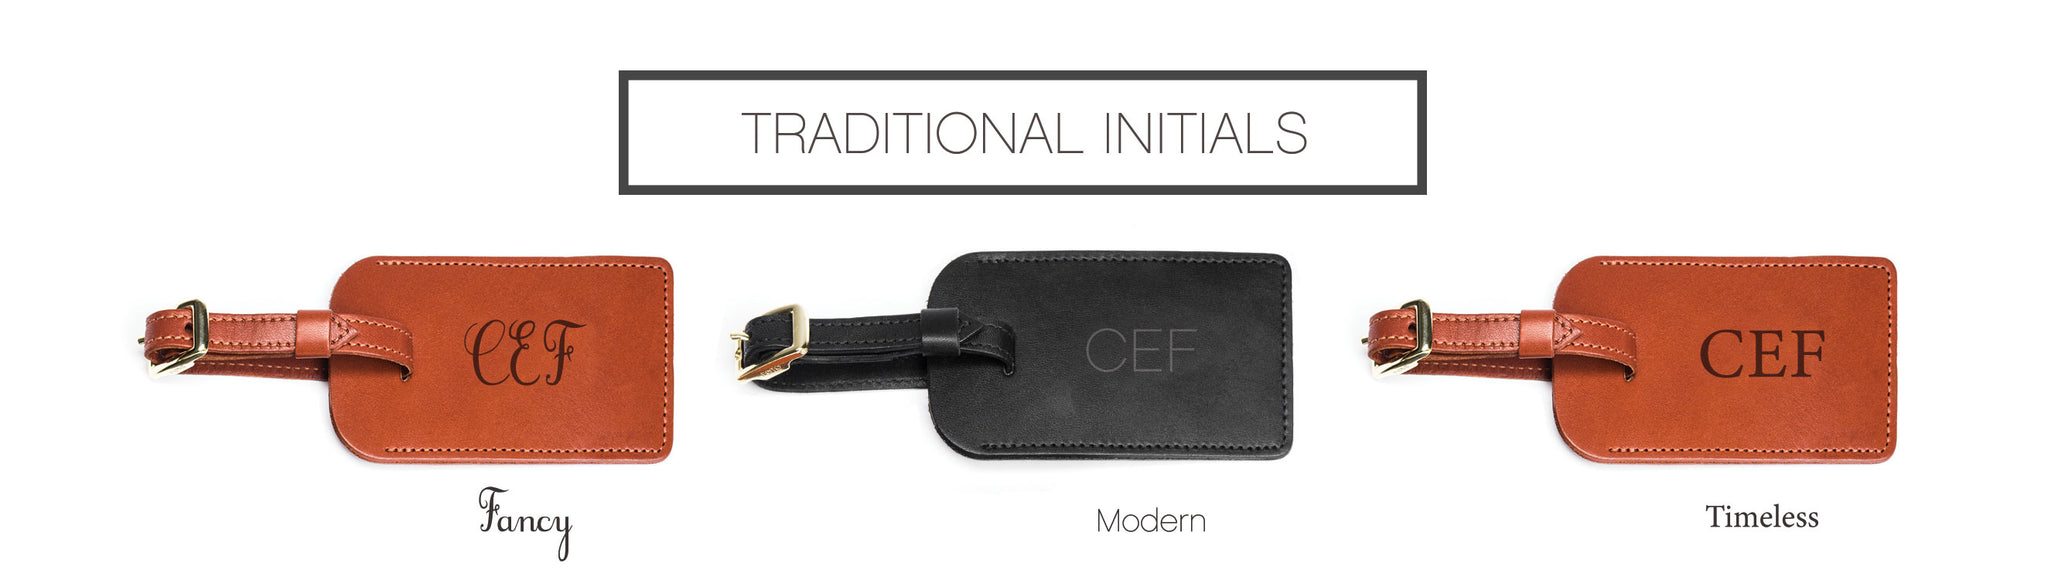 Luggage Tag Initials Personalization Options